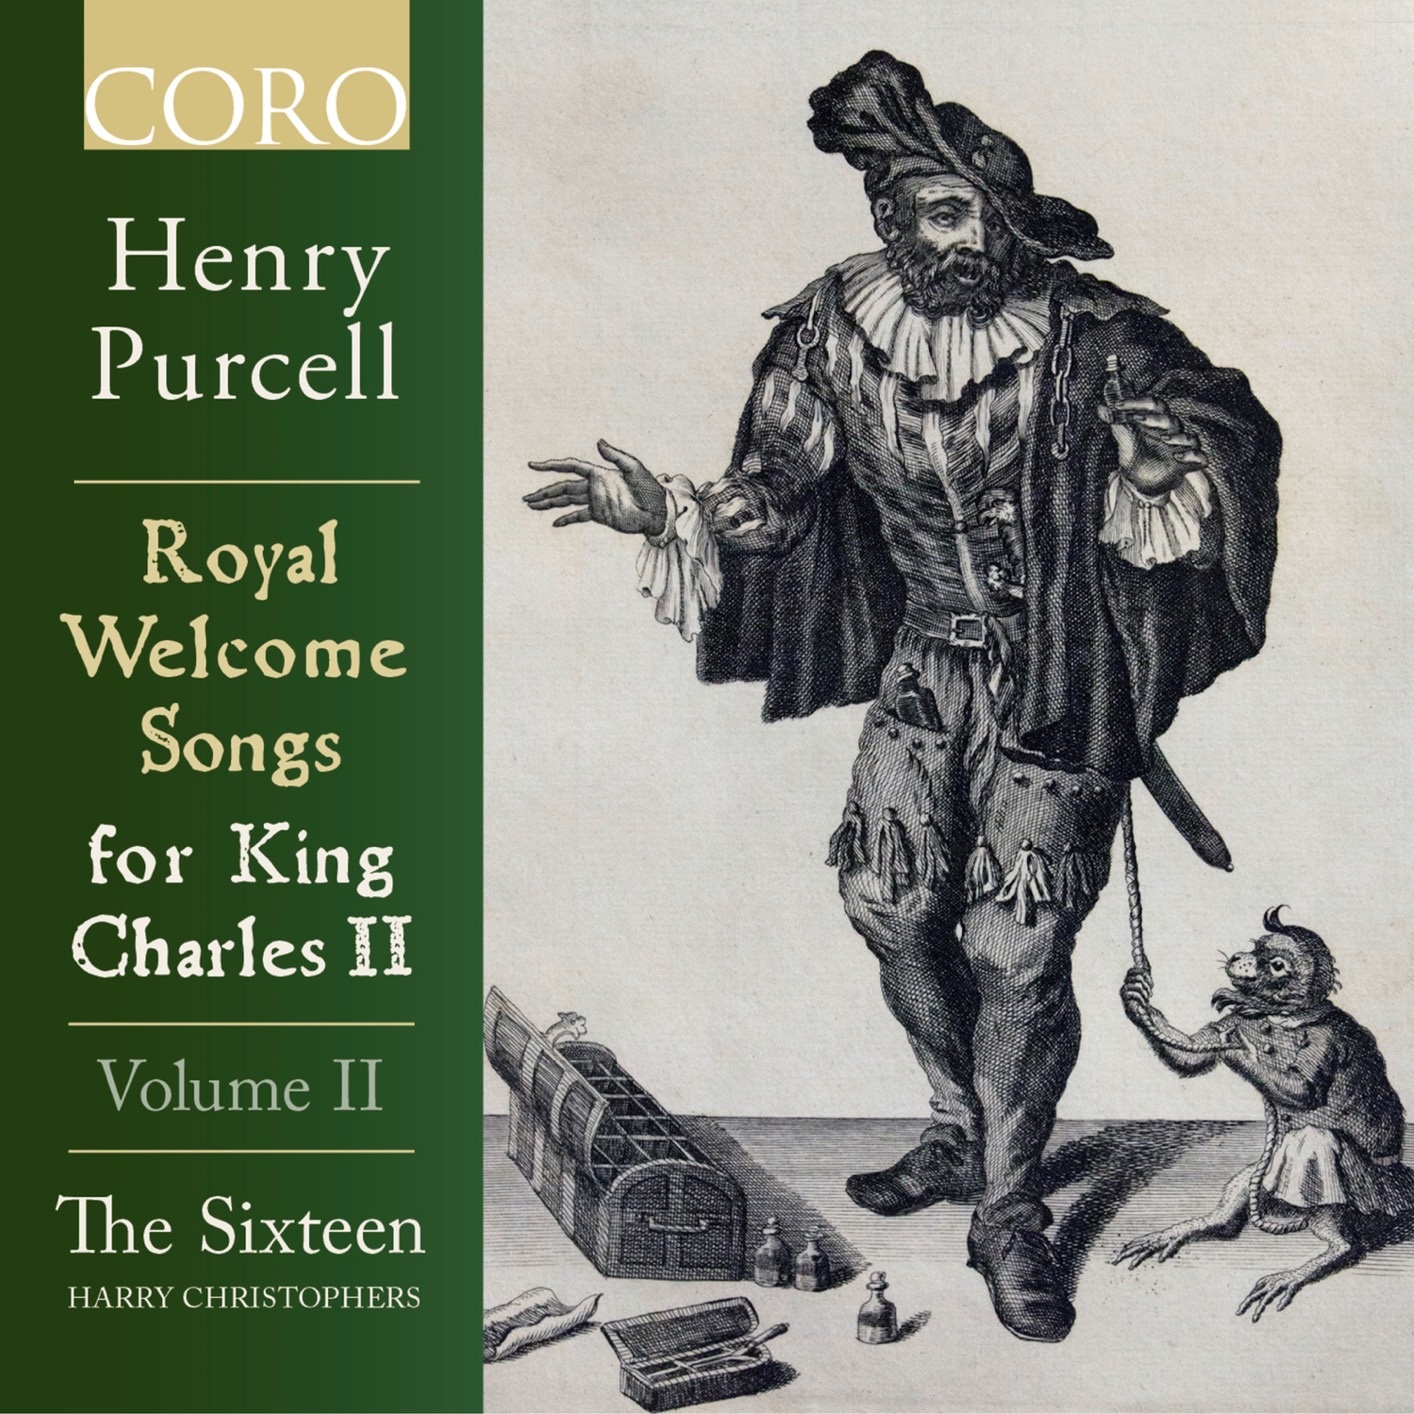 The Sixteen & Harry Christophers - Purcell: Royal Welcome Songs for King Charles II, Volume II (2019) [FLAC 24bit/96kHz]